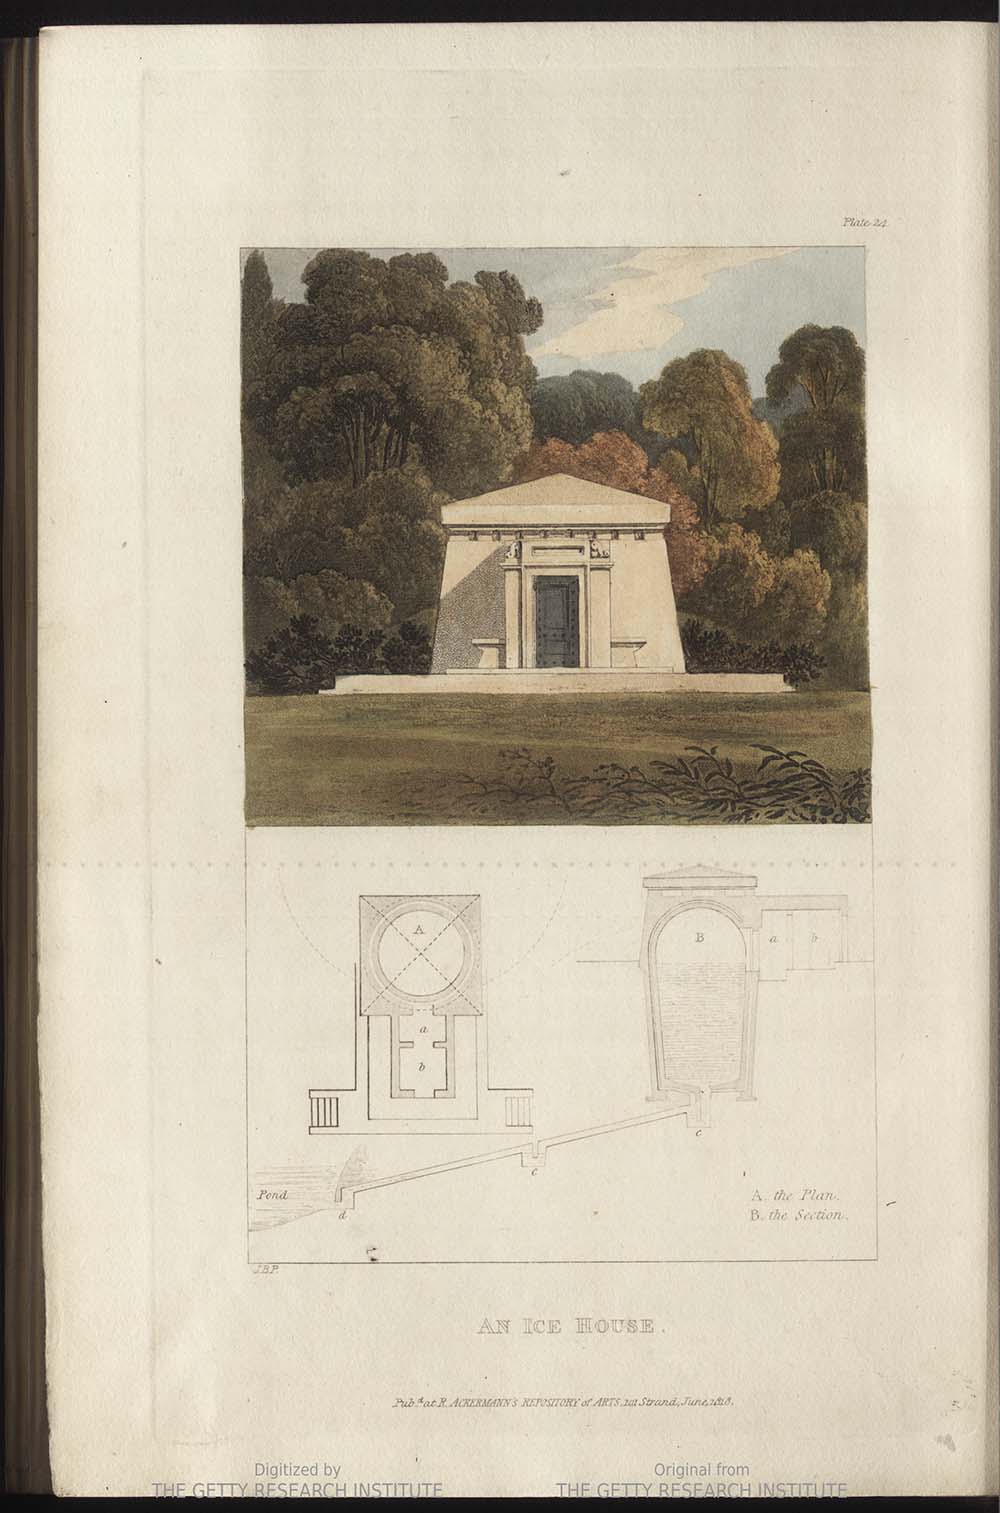 Architectural drawing for an Icehouse